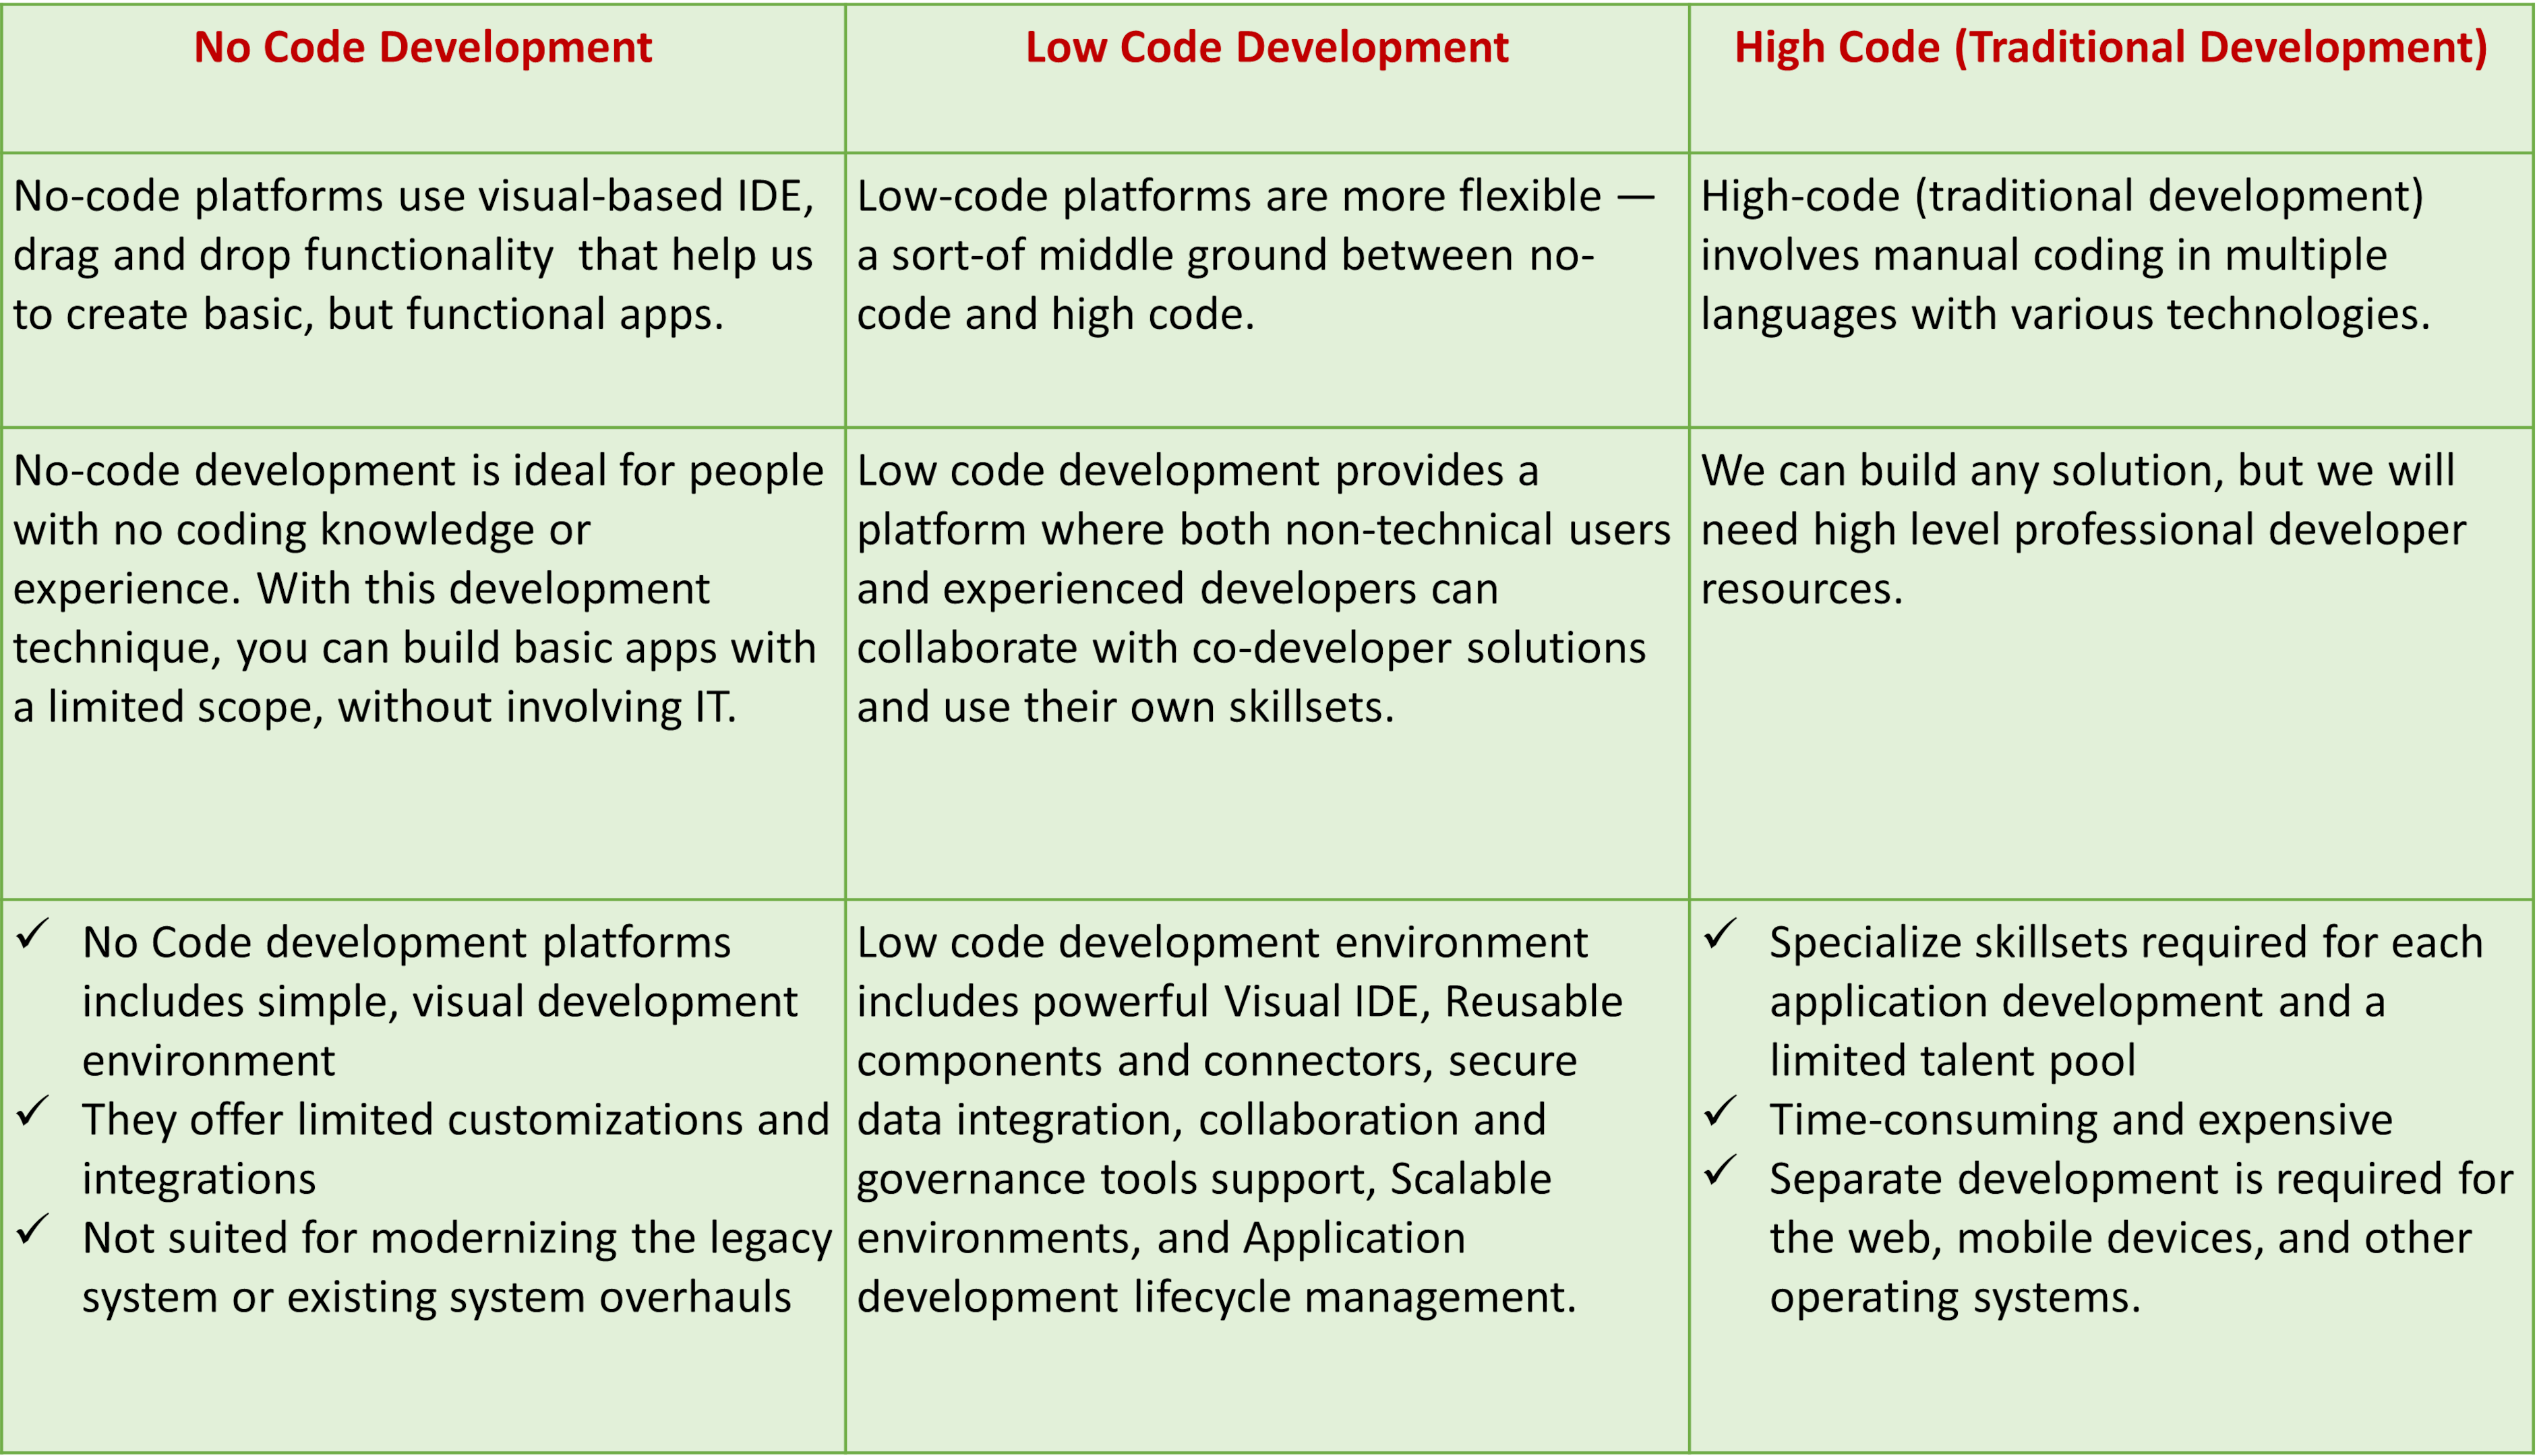 Comparision table of Noe code, Low code and High code (Traditional Development)